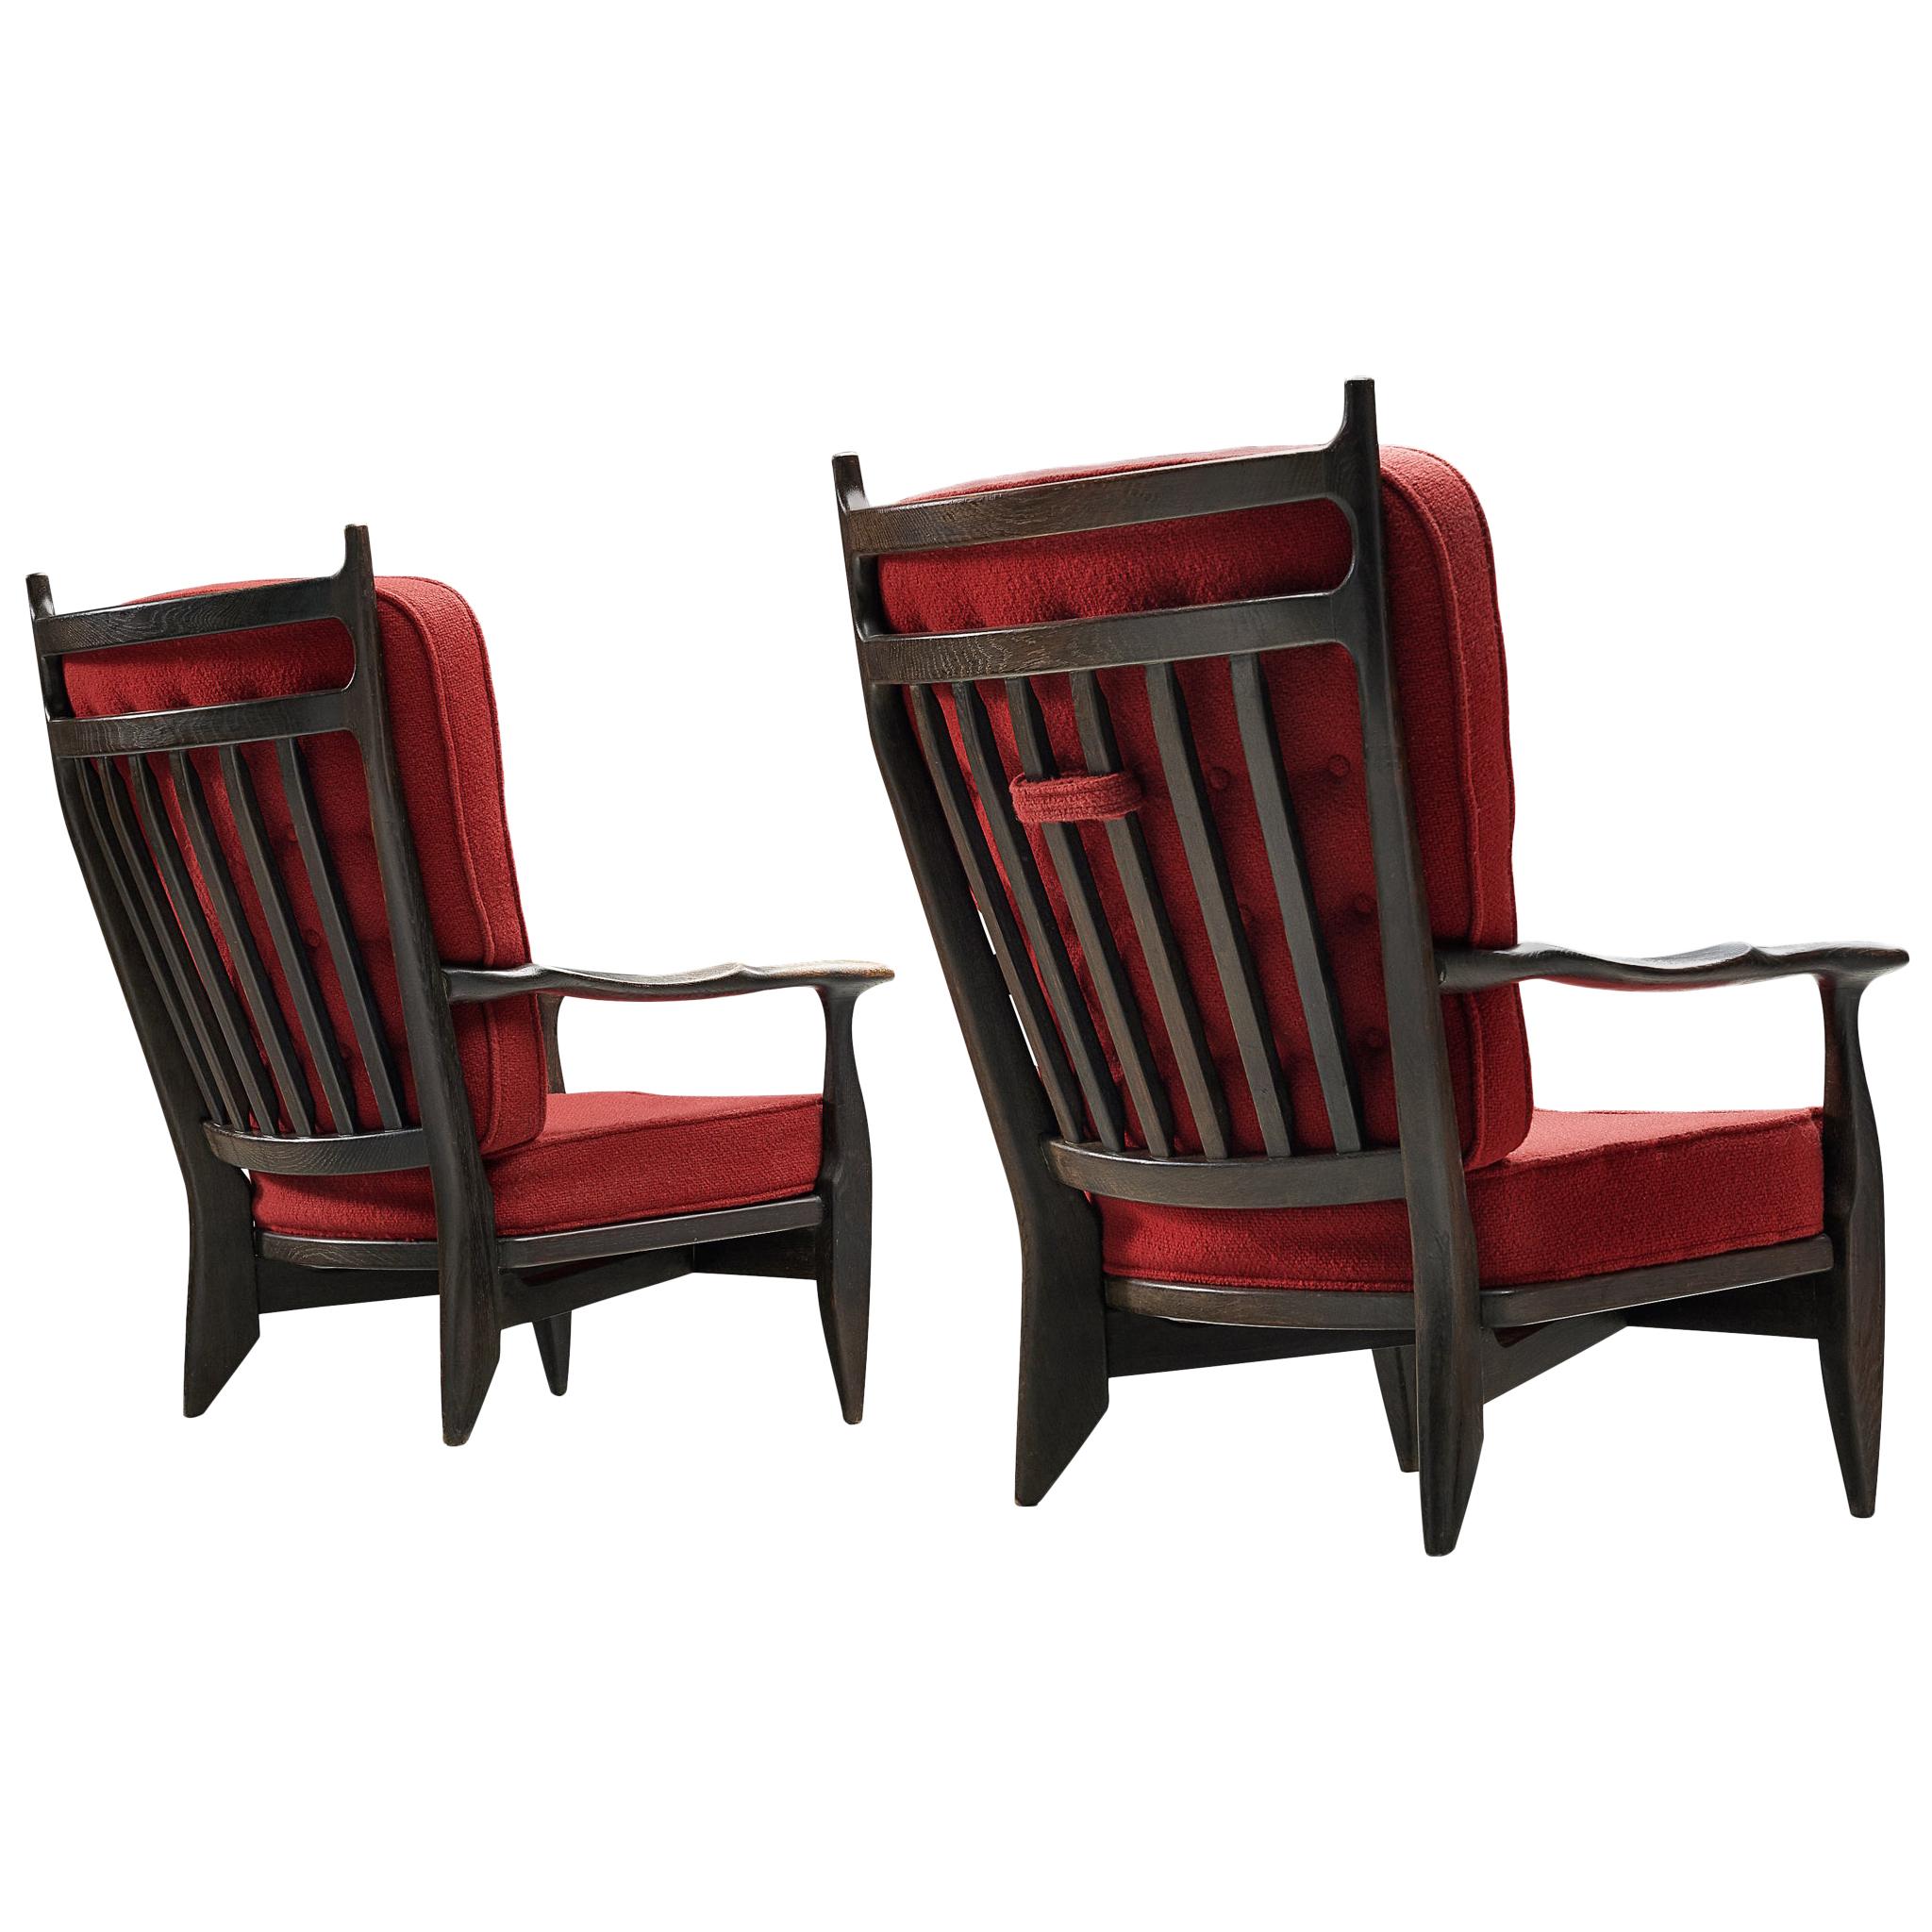 Guillerme et Chambron Lounge Chairs in Oak with Red Upholstery